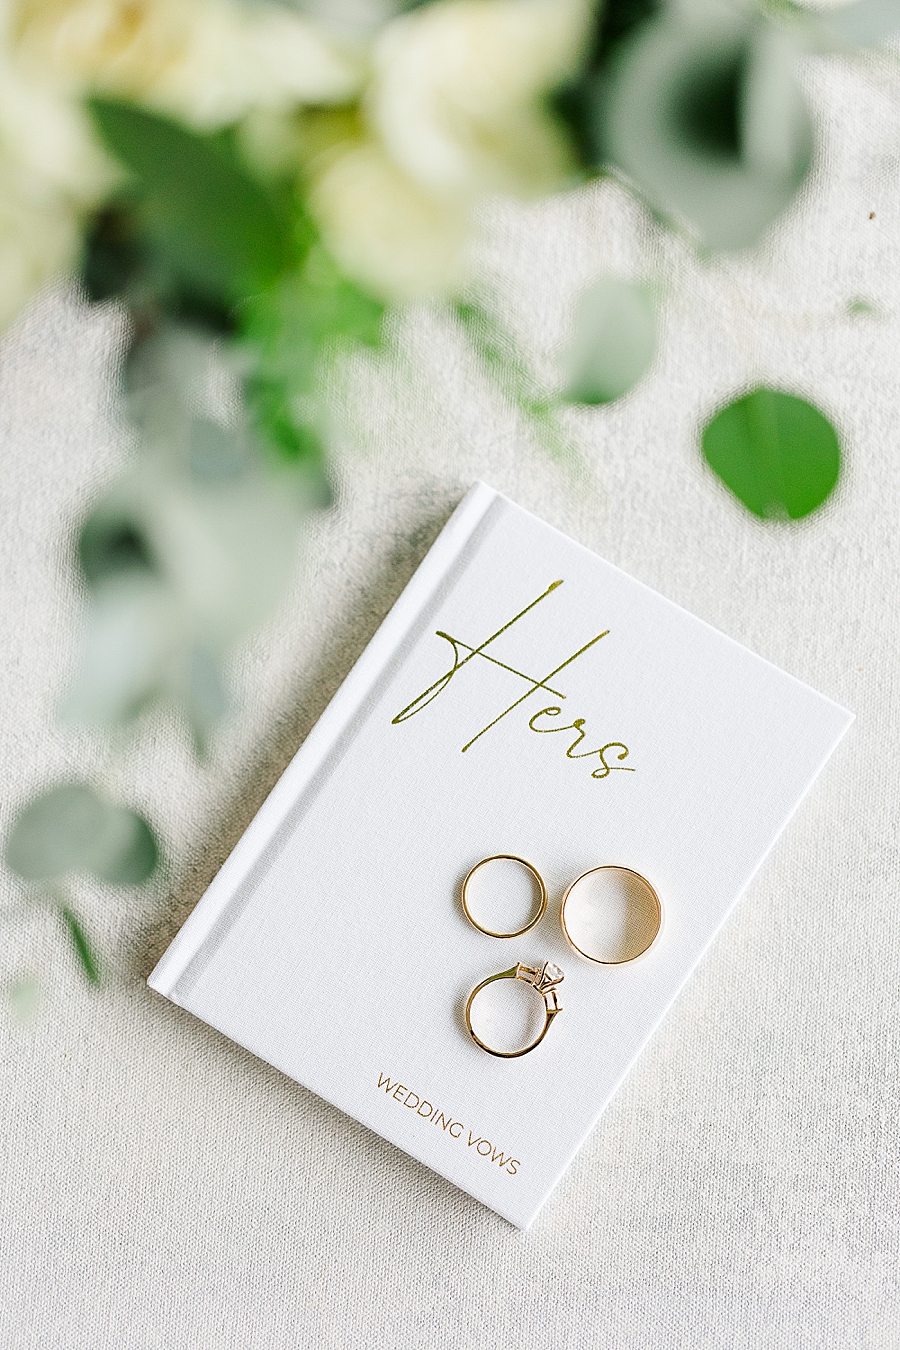 Three wedding bands sitting on a vow book.